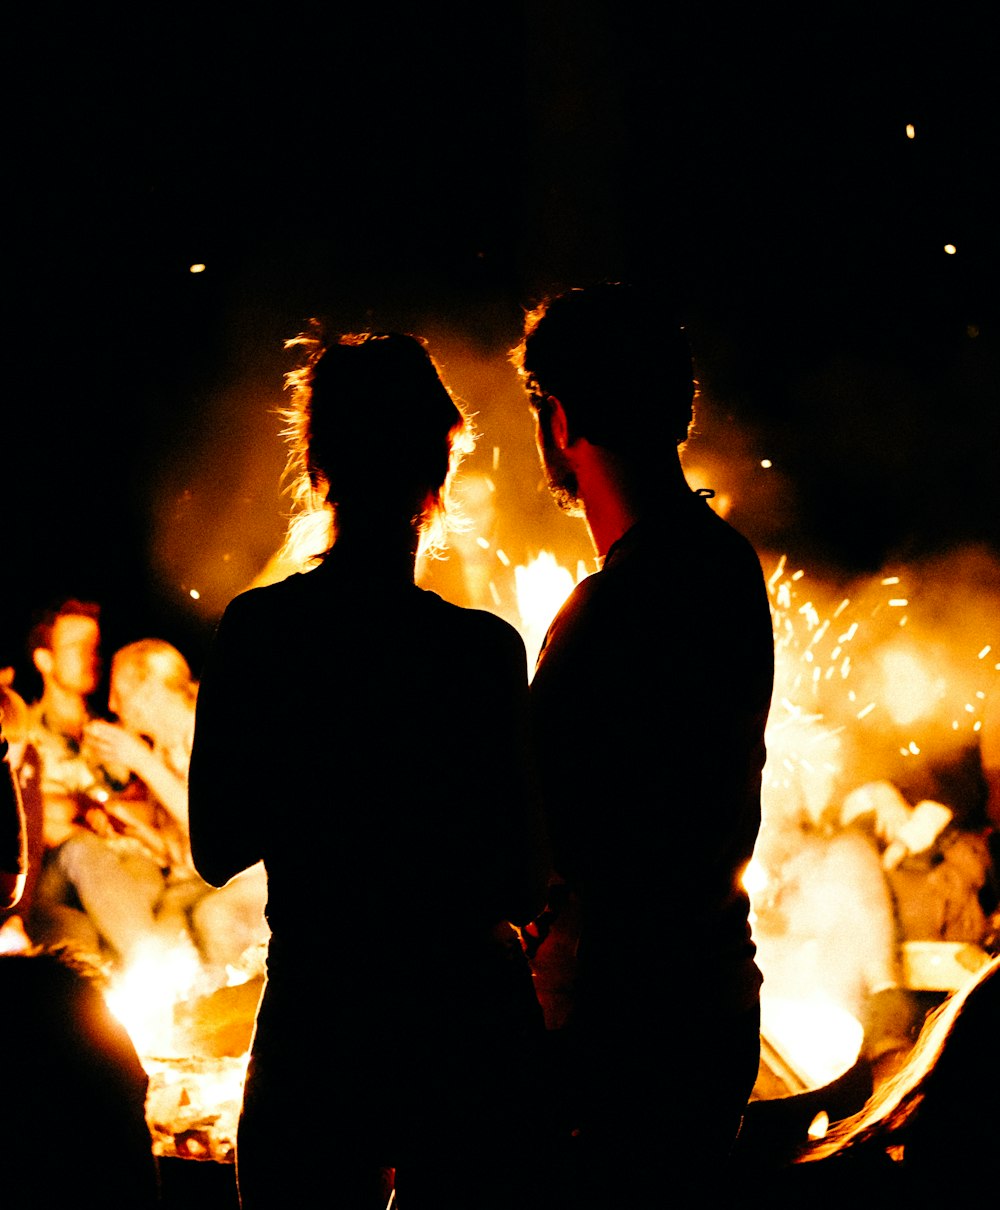 two persons standing in front of bonfire